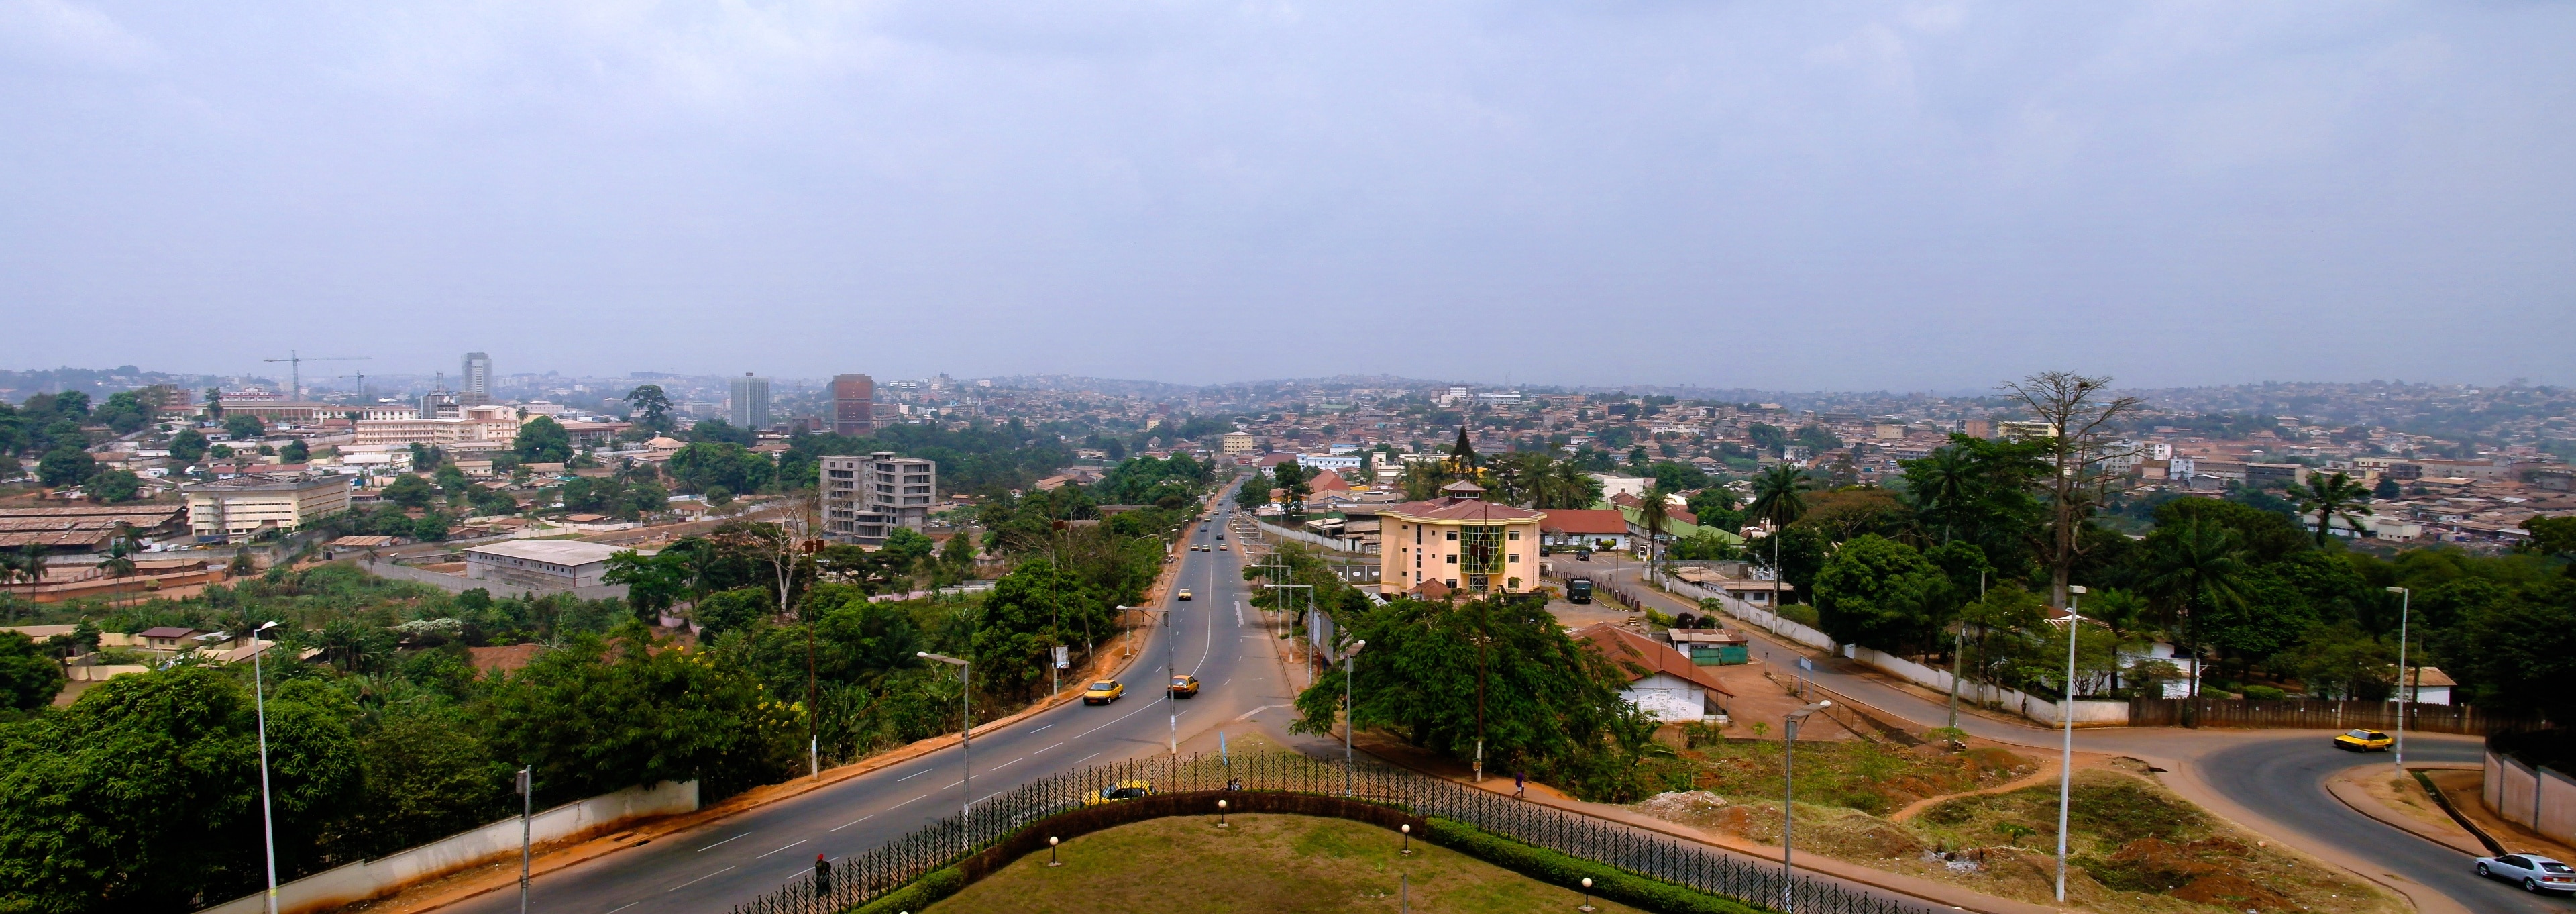 Central, Cameroon